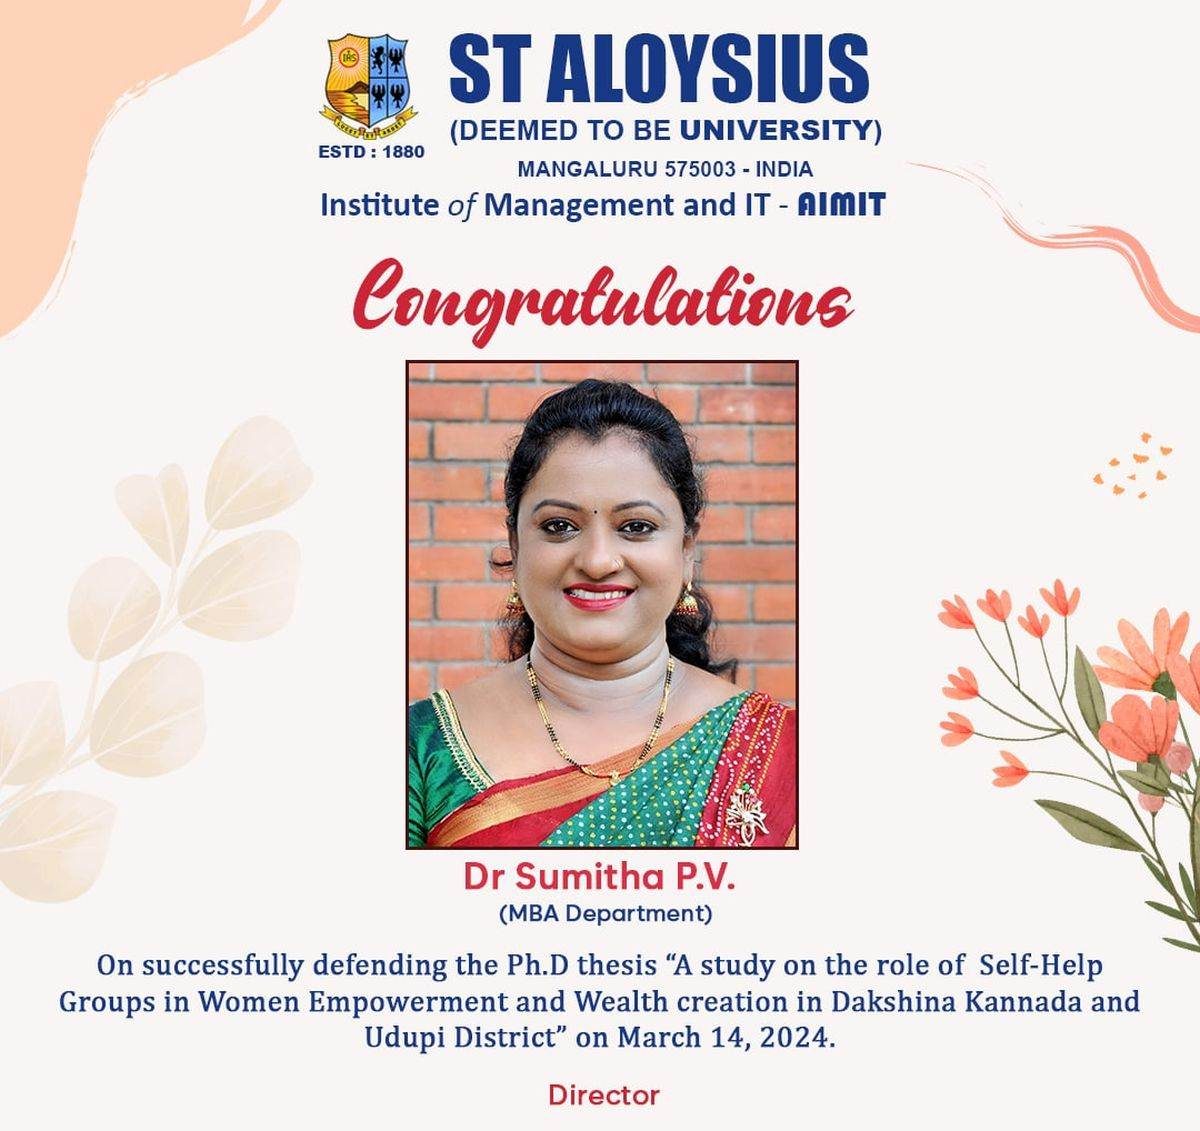 Aimit wishes Heartly Congratulations to Dr. Sumitha P. V